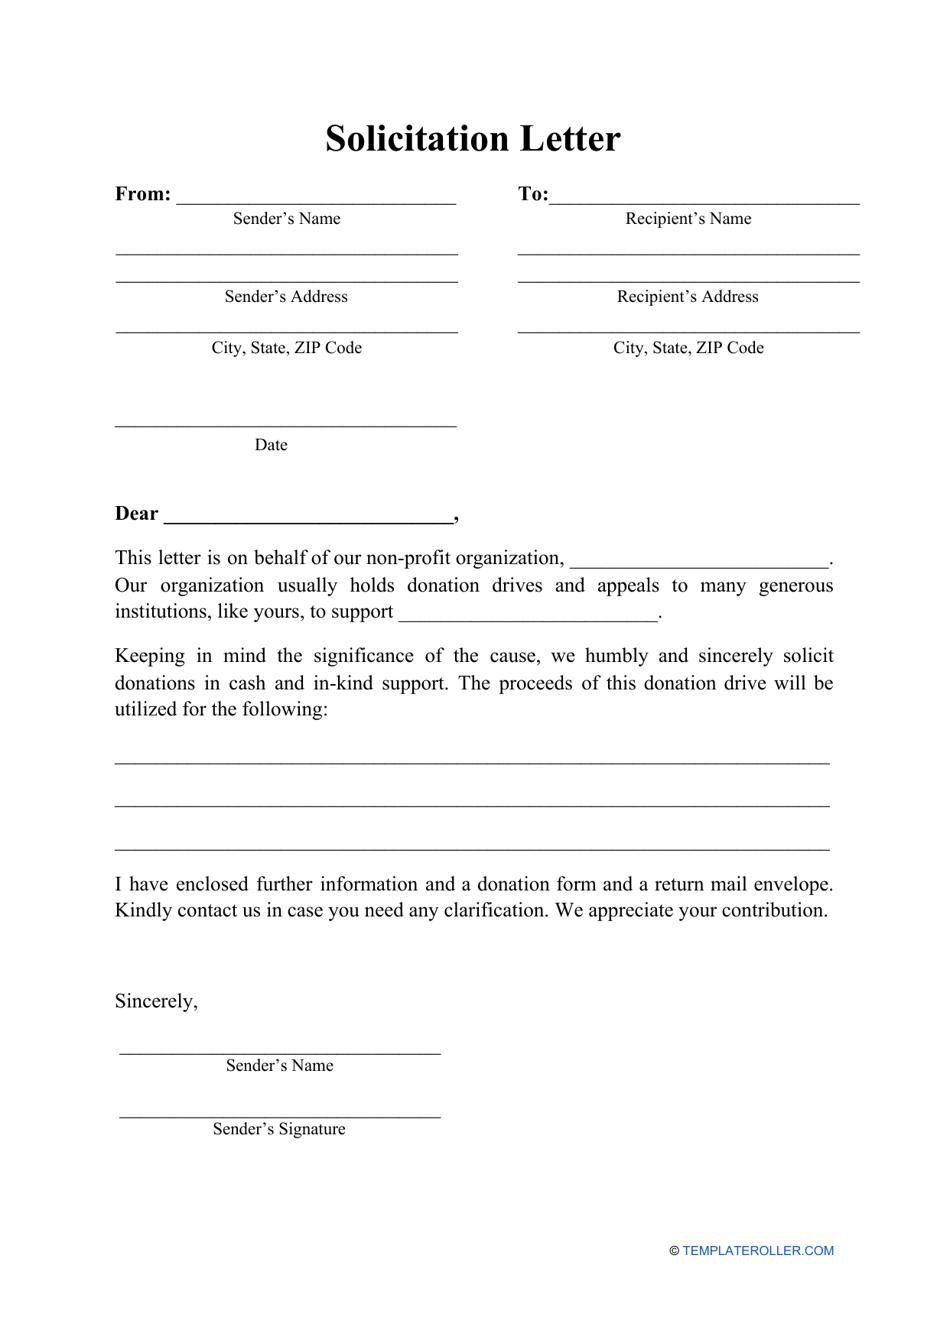 Solicitation letter template preview